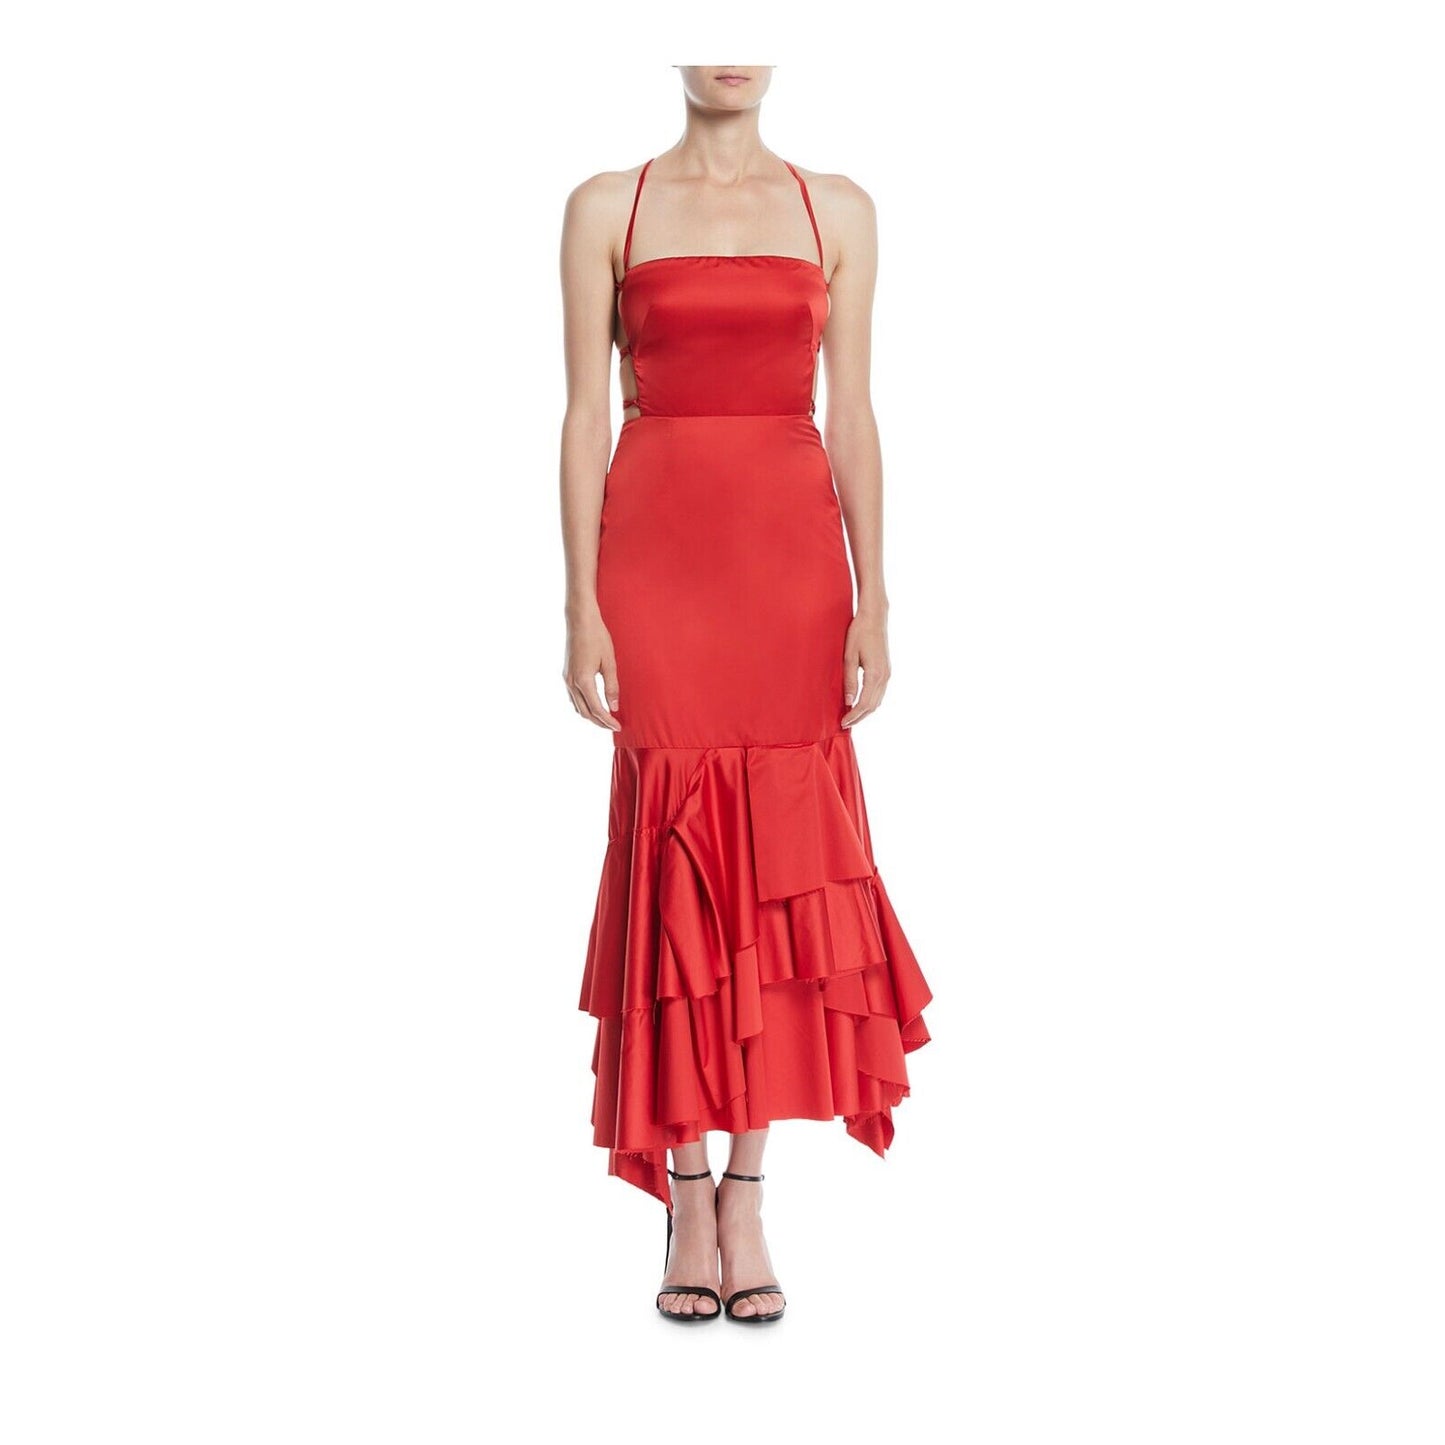 Milly Doria Scarlet Open Back Strappy Flounce Ruffle Apron Dress 8 NWT $650